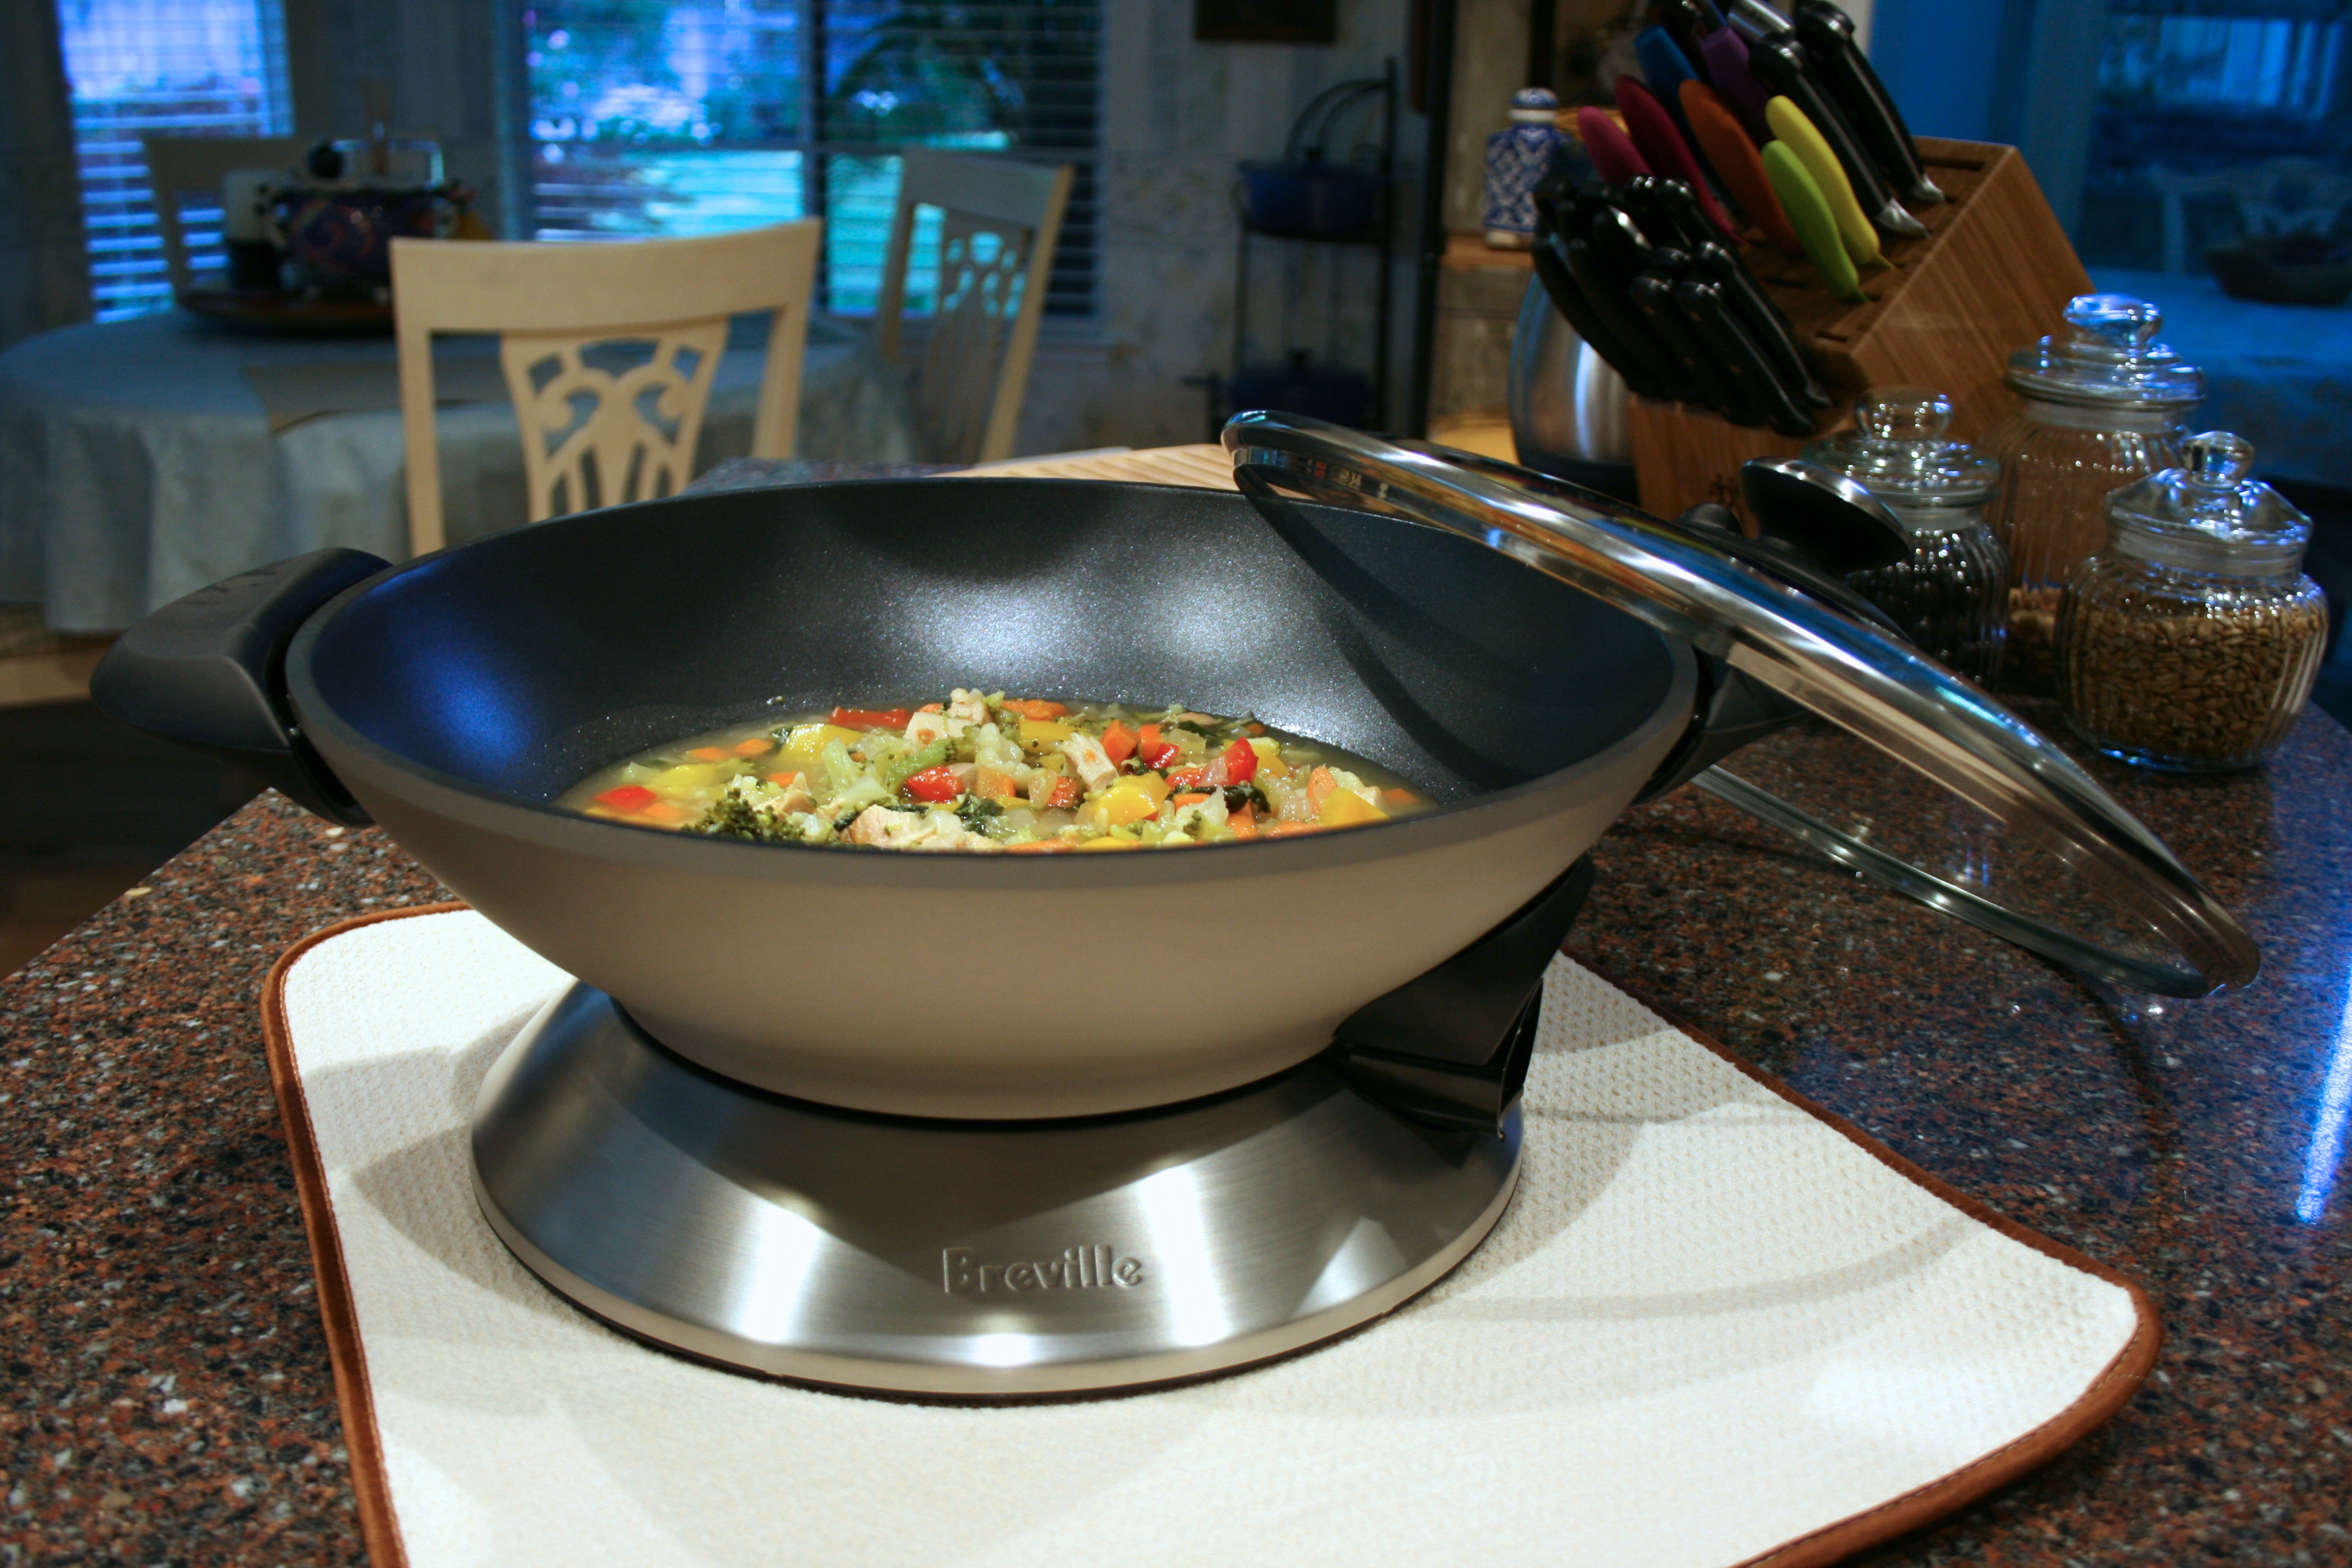 Breville Electric Wok: #Product #Review - Finding Our Way Now.